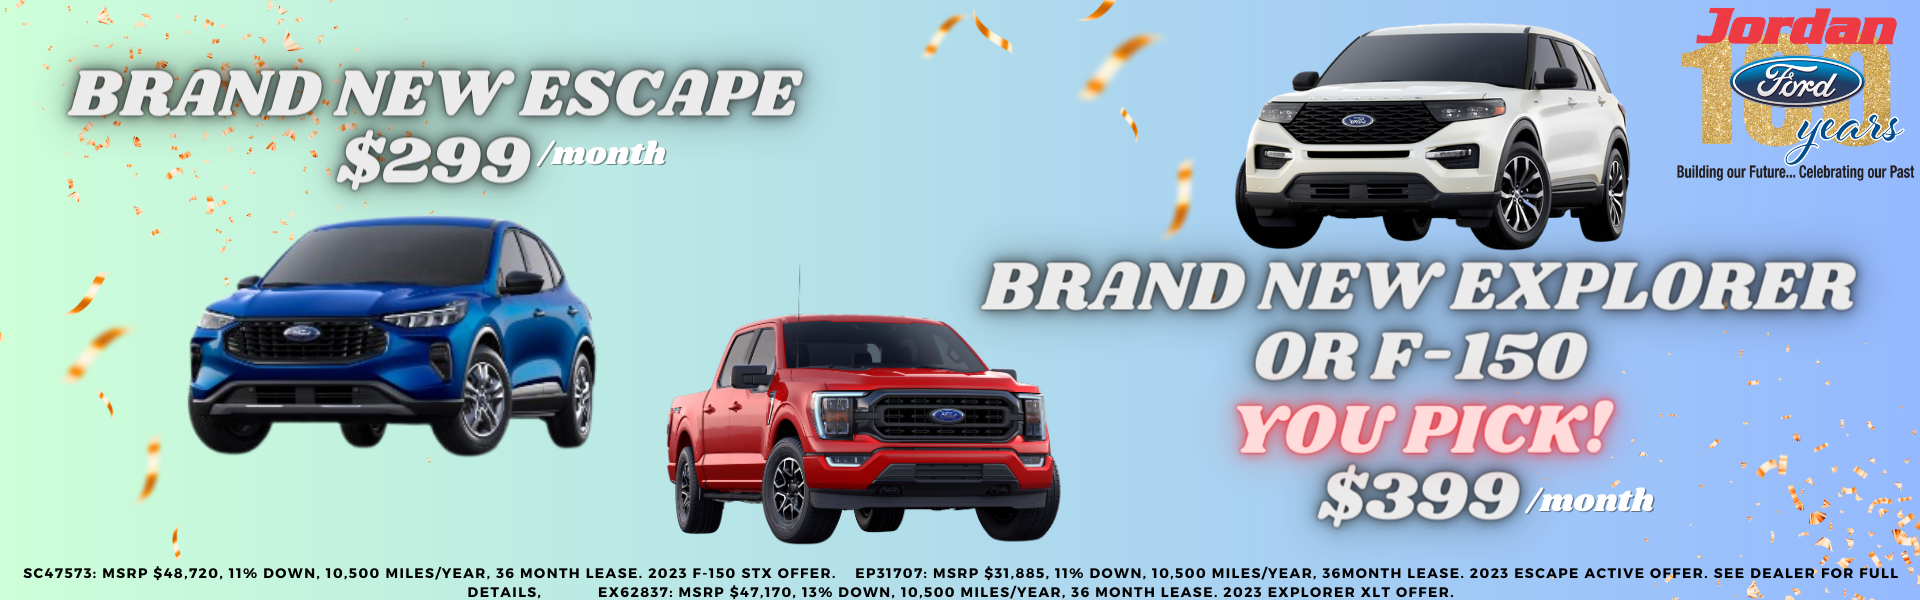 Escape for $299/month F-150 or Explorer $399/month